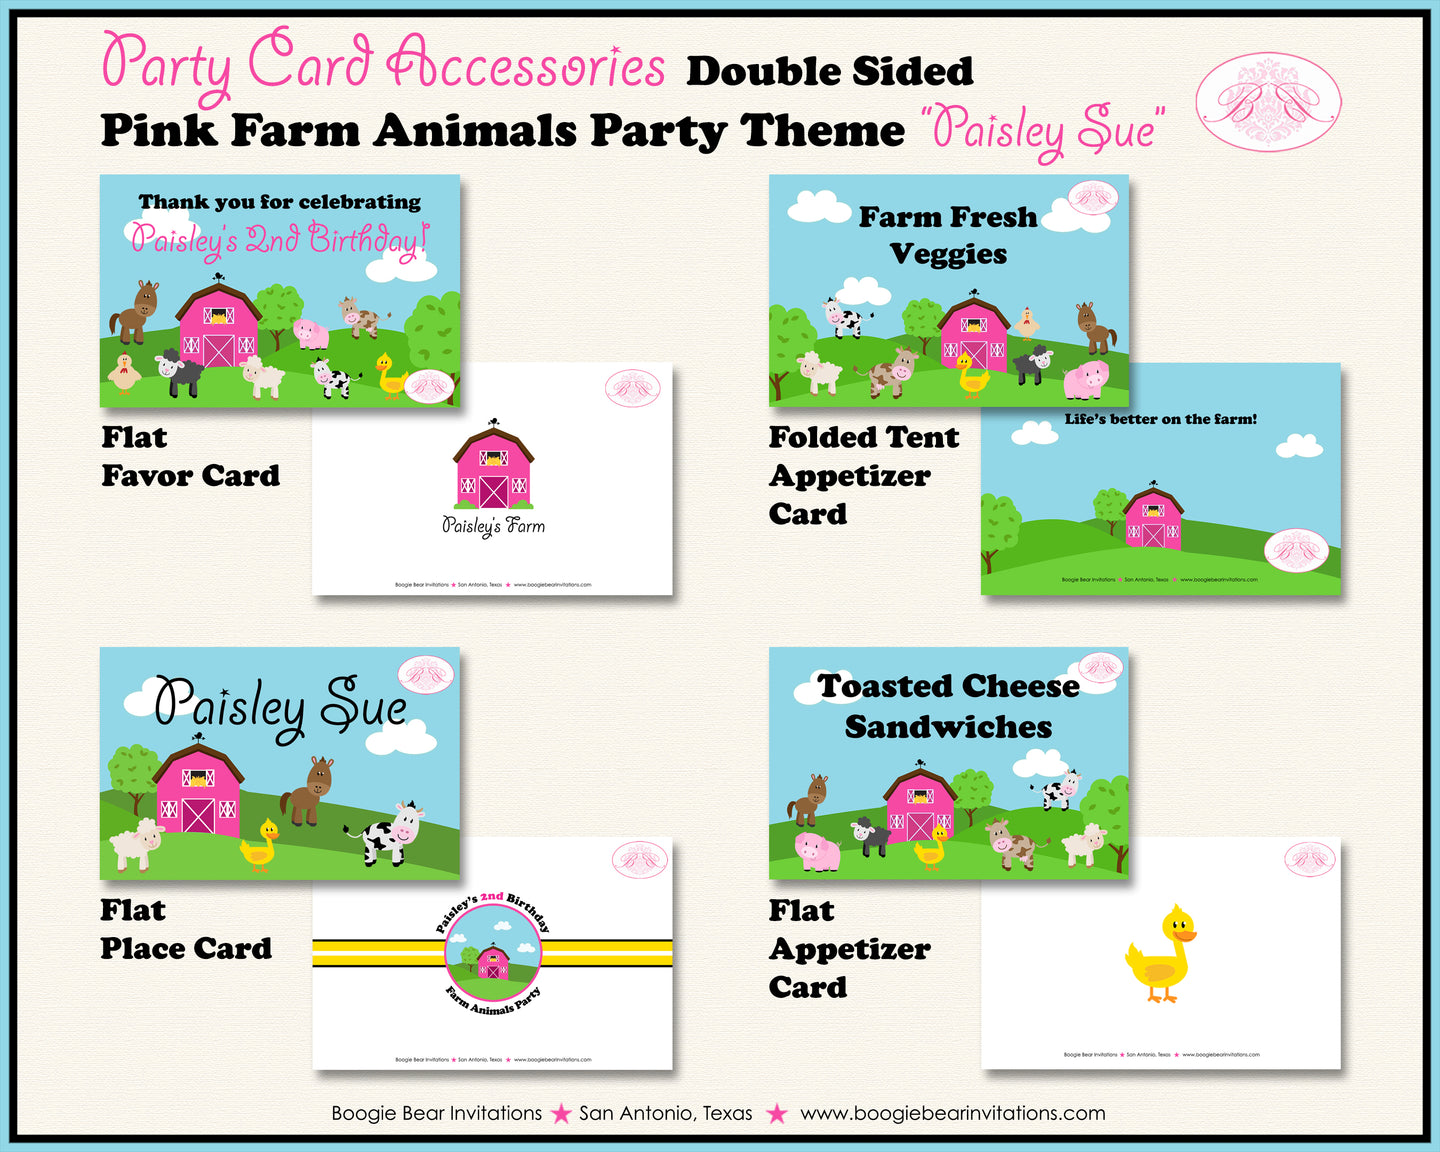 Pink Farm Animals Birthday Favor Party Card Tent Appetizer Place Barn Girl Boogie Bear Invitations Paisley Sue Theme